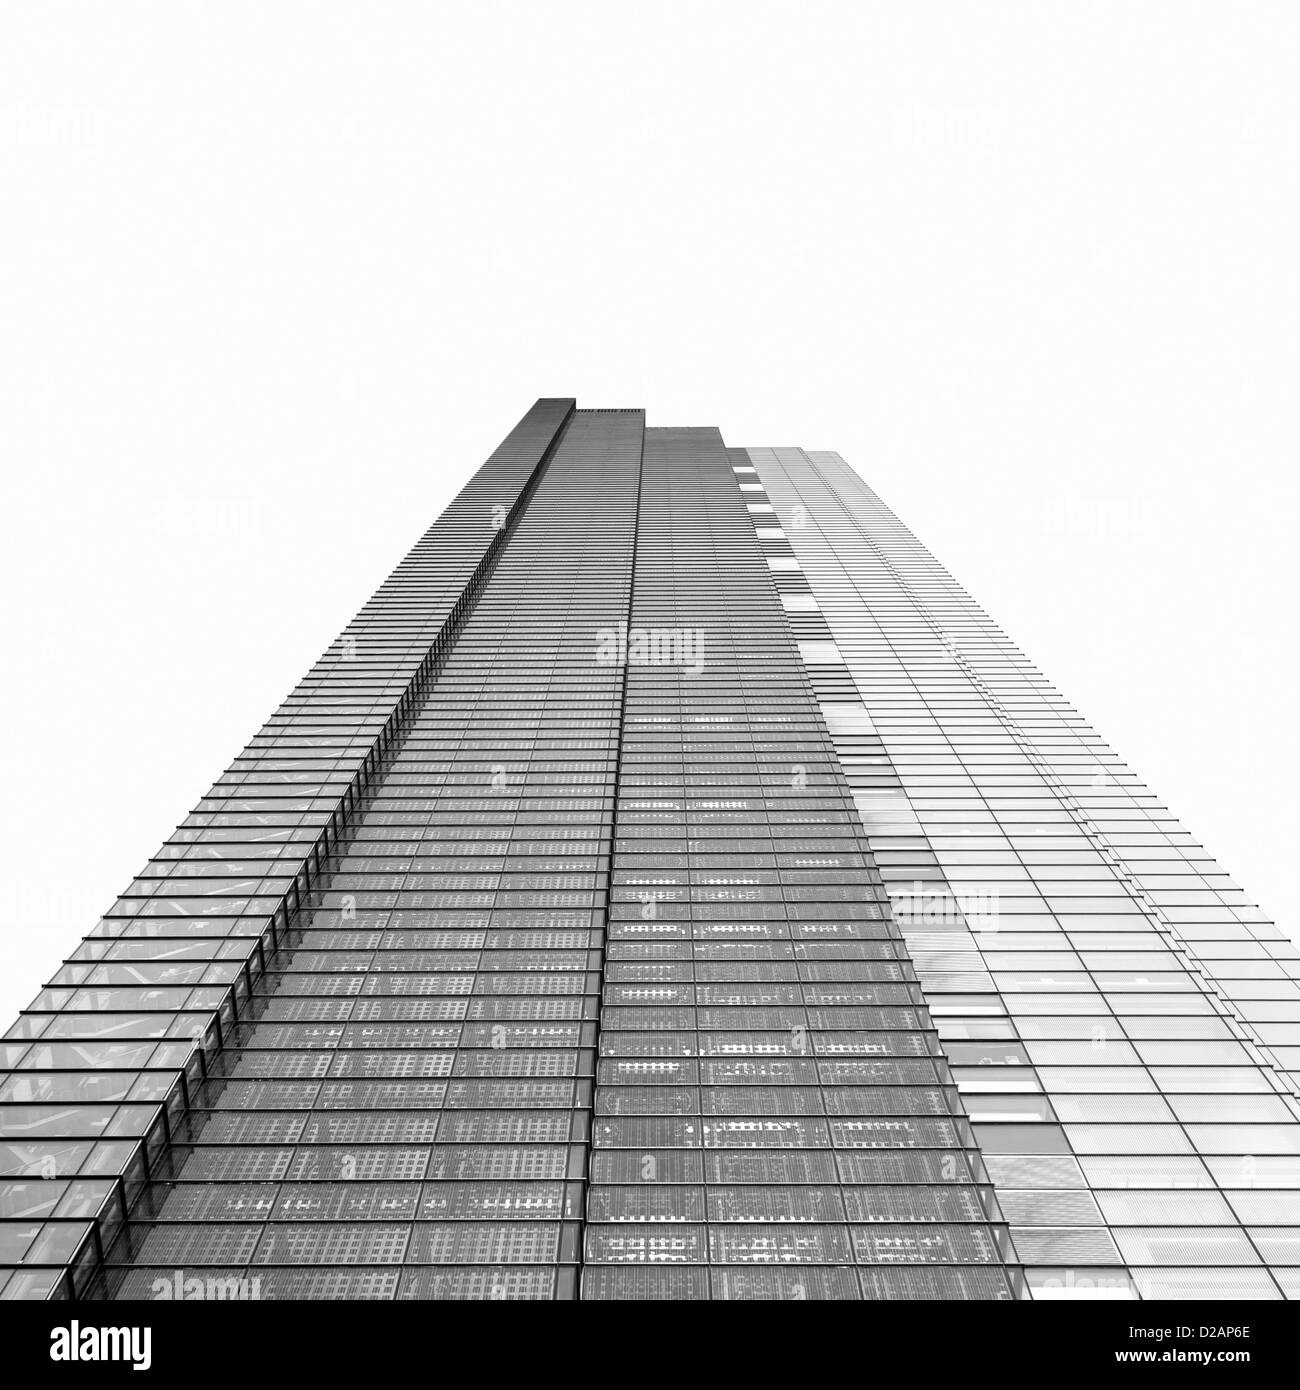 Low angle view of skyscraper Stock Photo